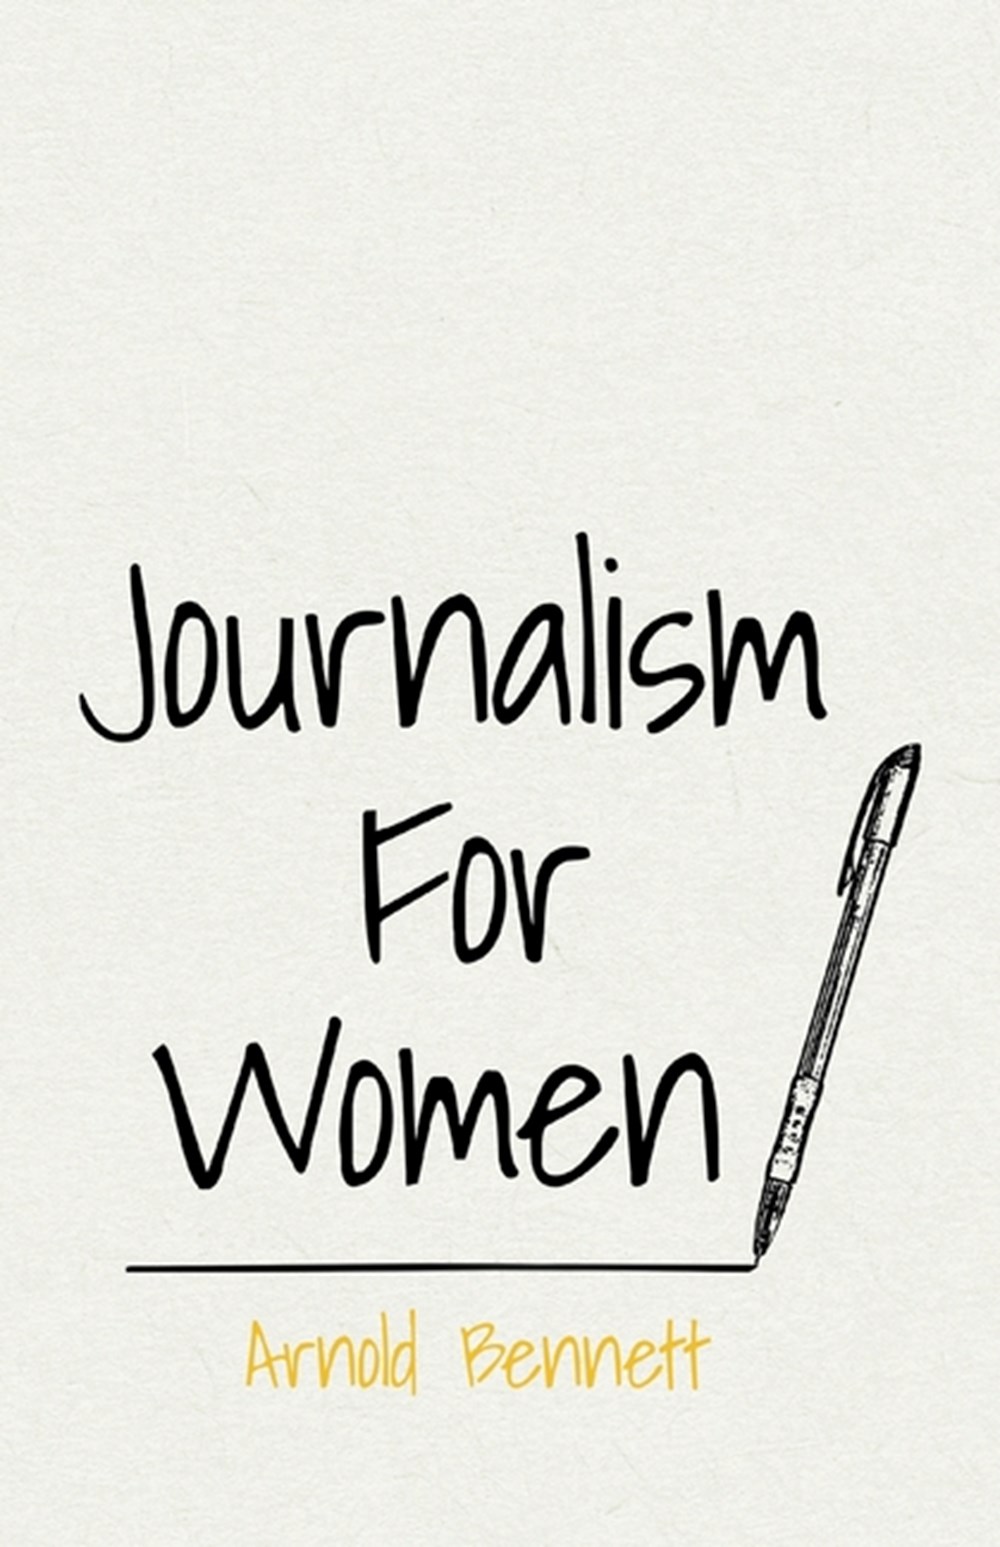 Journalism For Women: With an Essay From Arnold Bennett By F. J. Harvey Darton